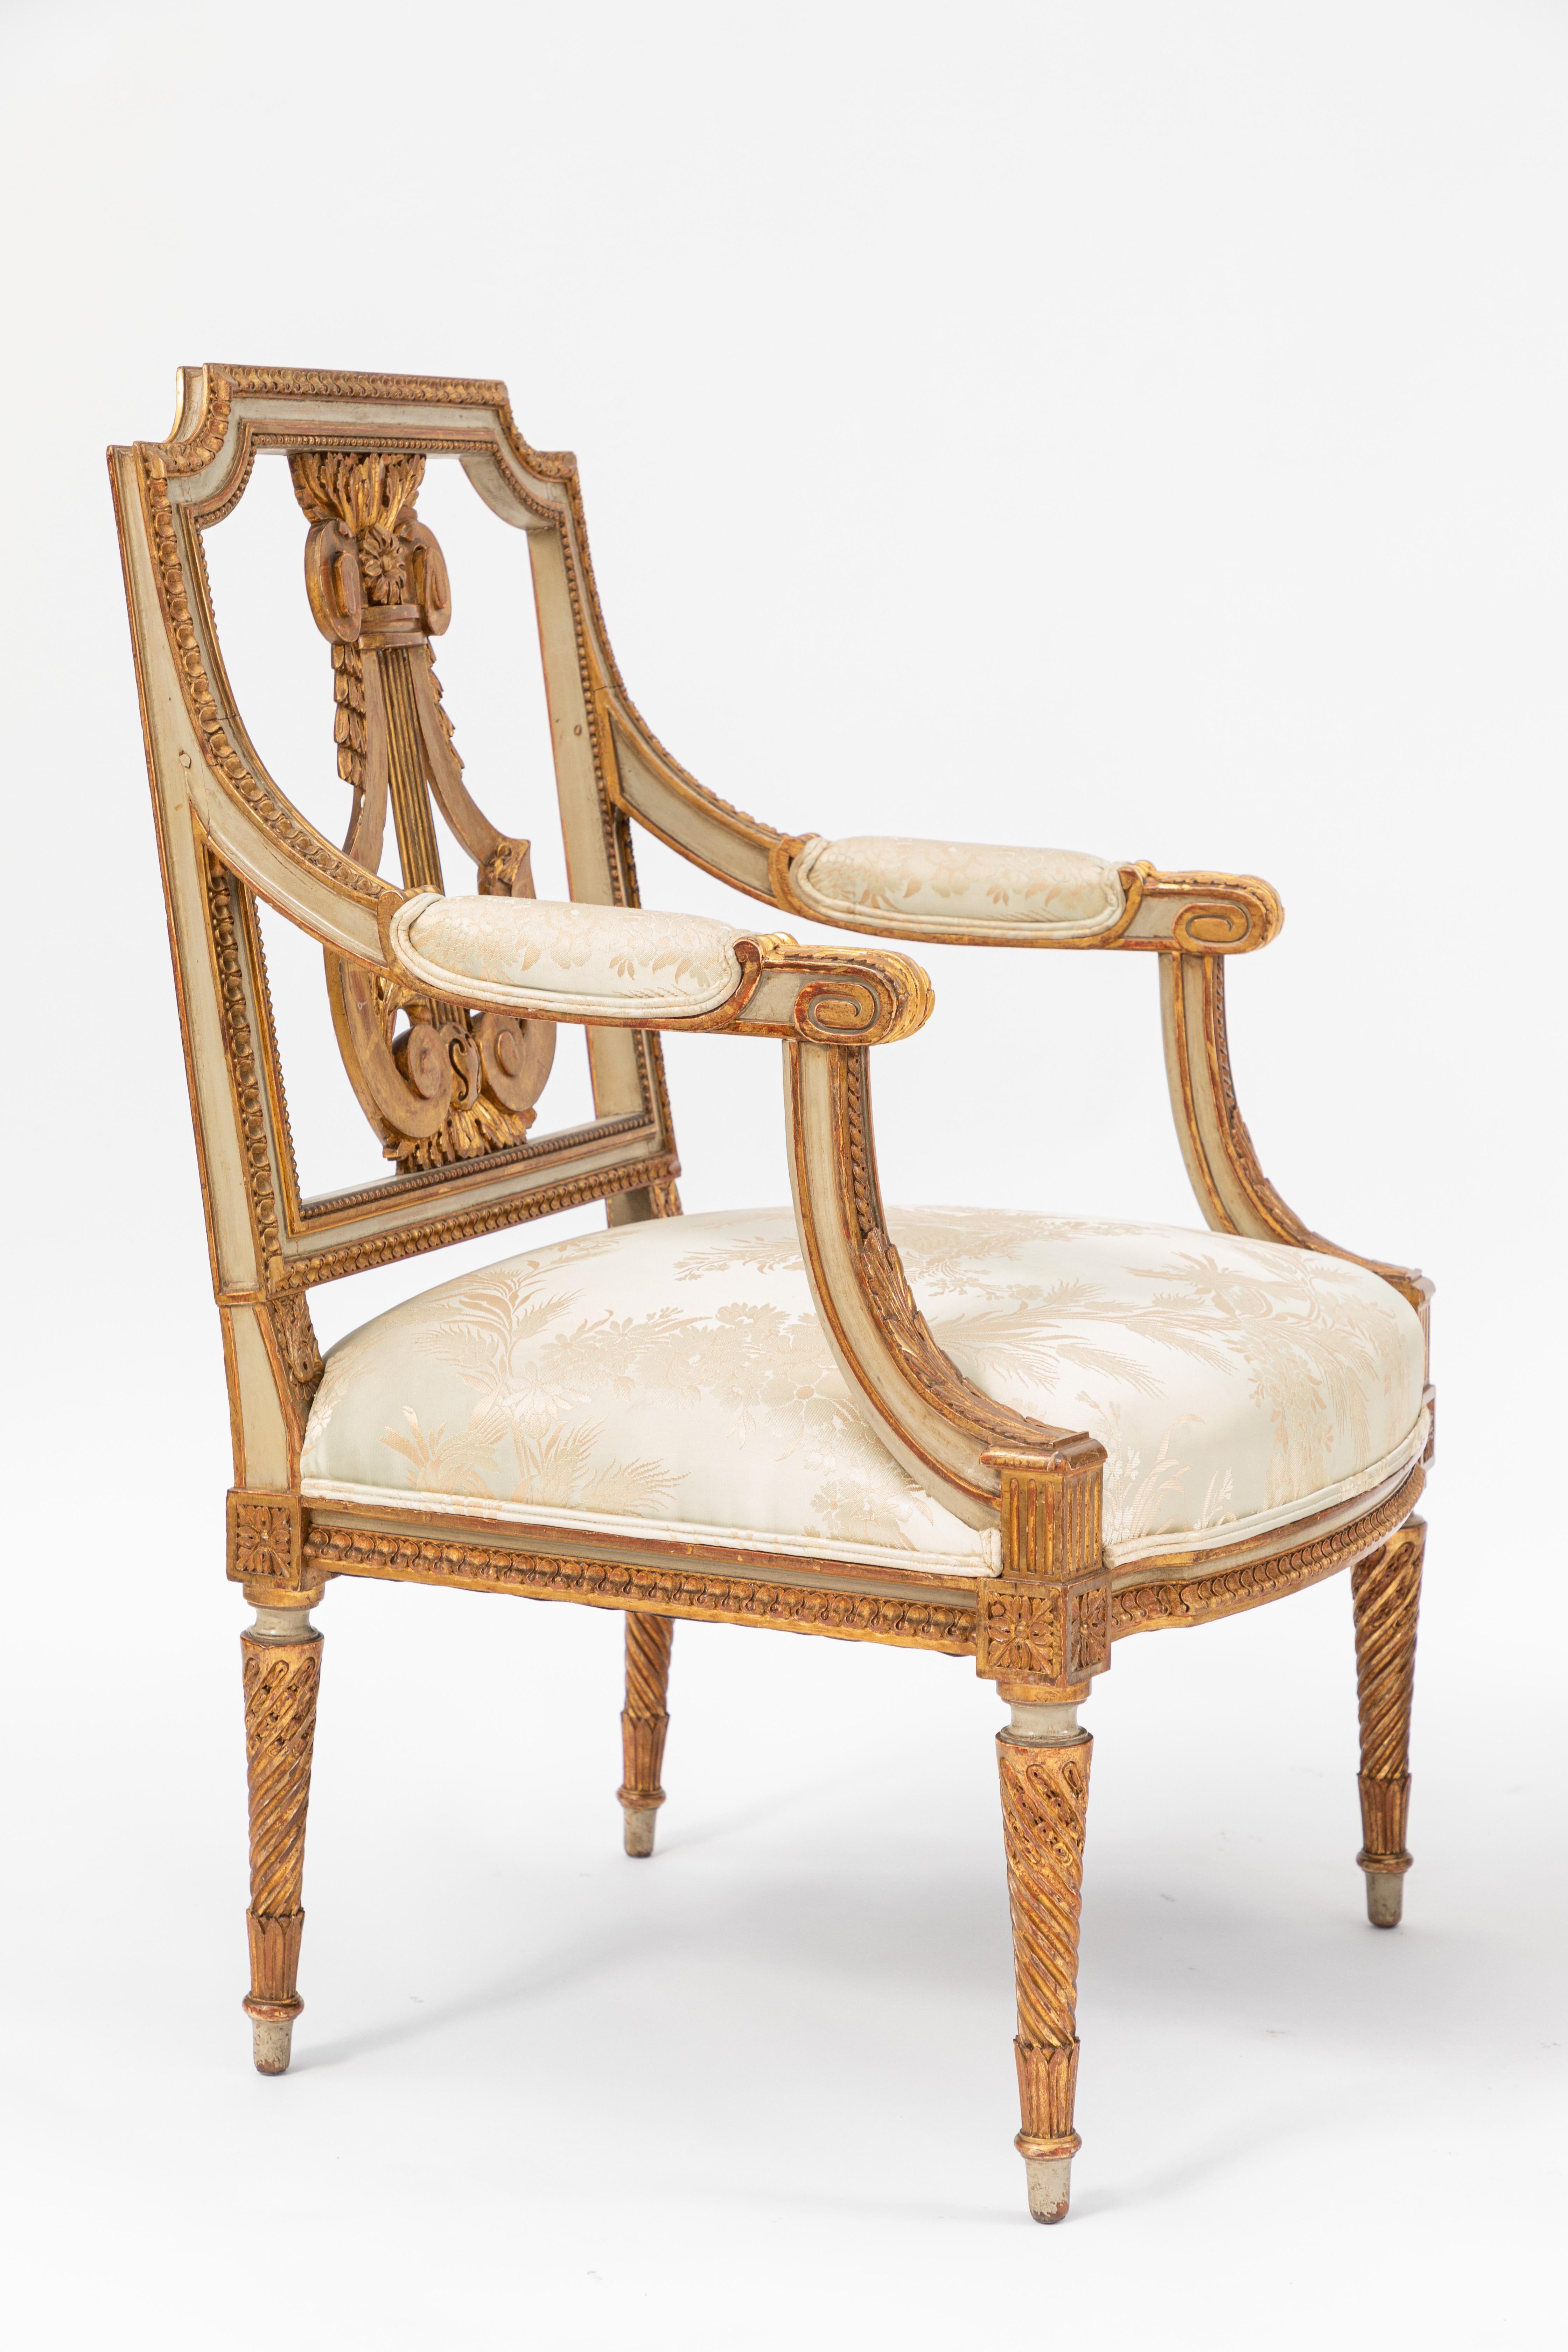 Rare pair of fine early 19th century French painted giltwood armchairs with lyre motif.